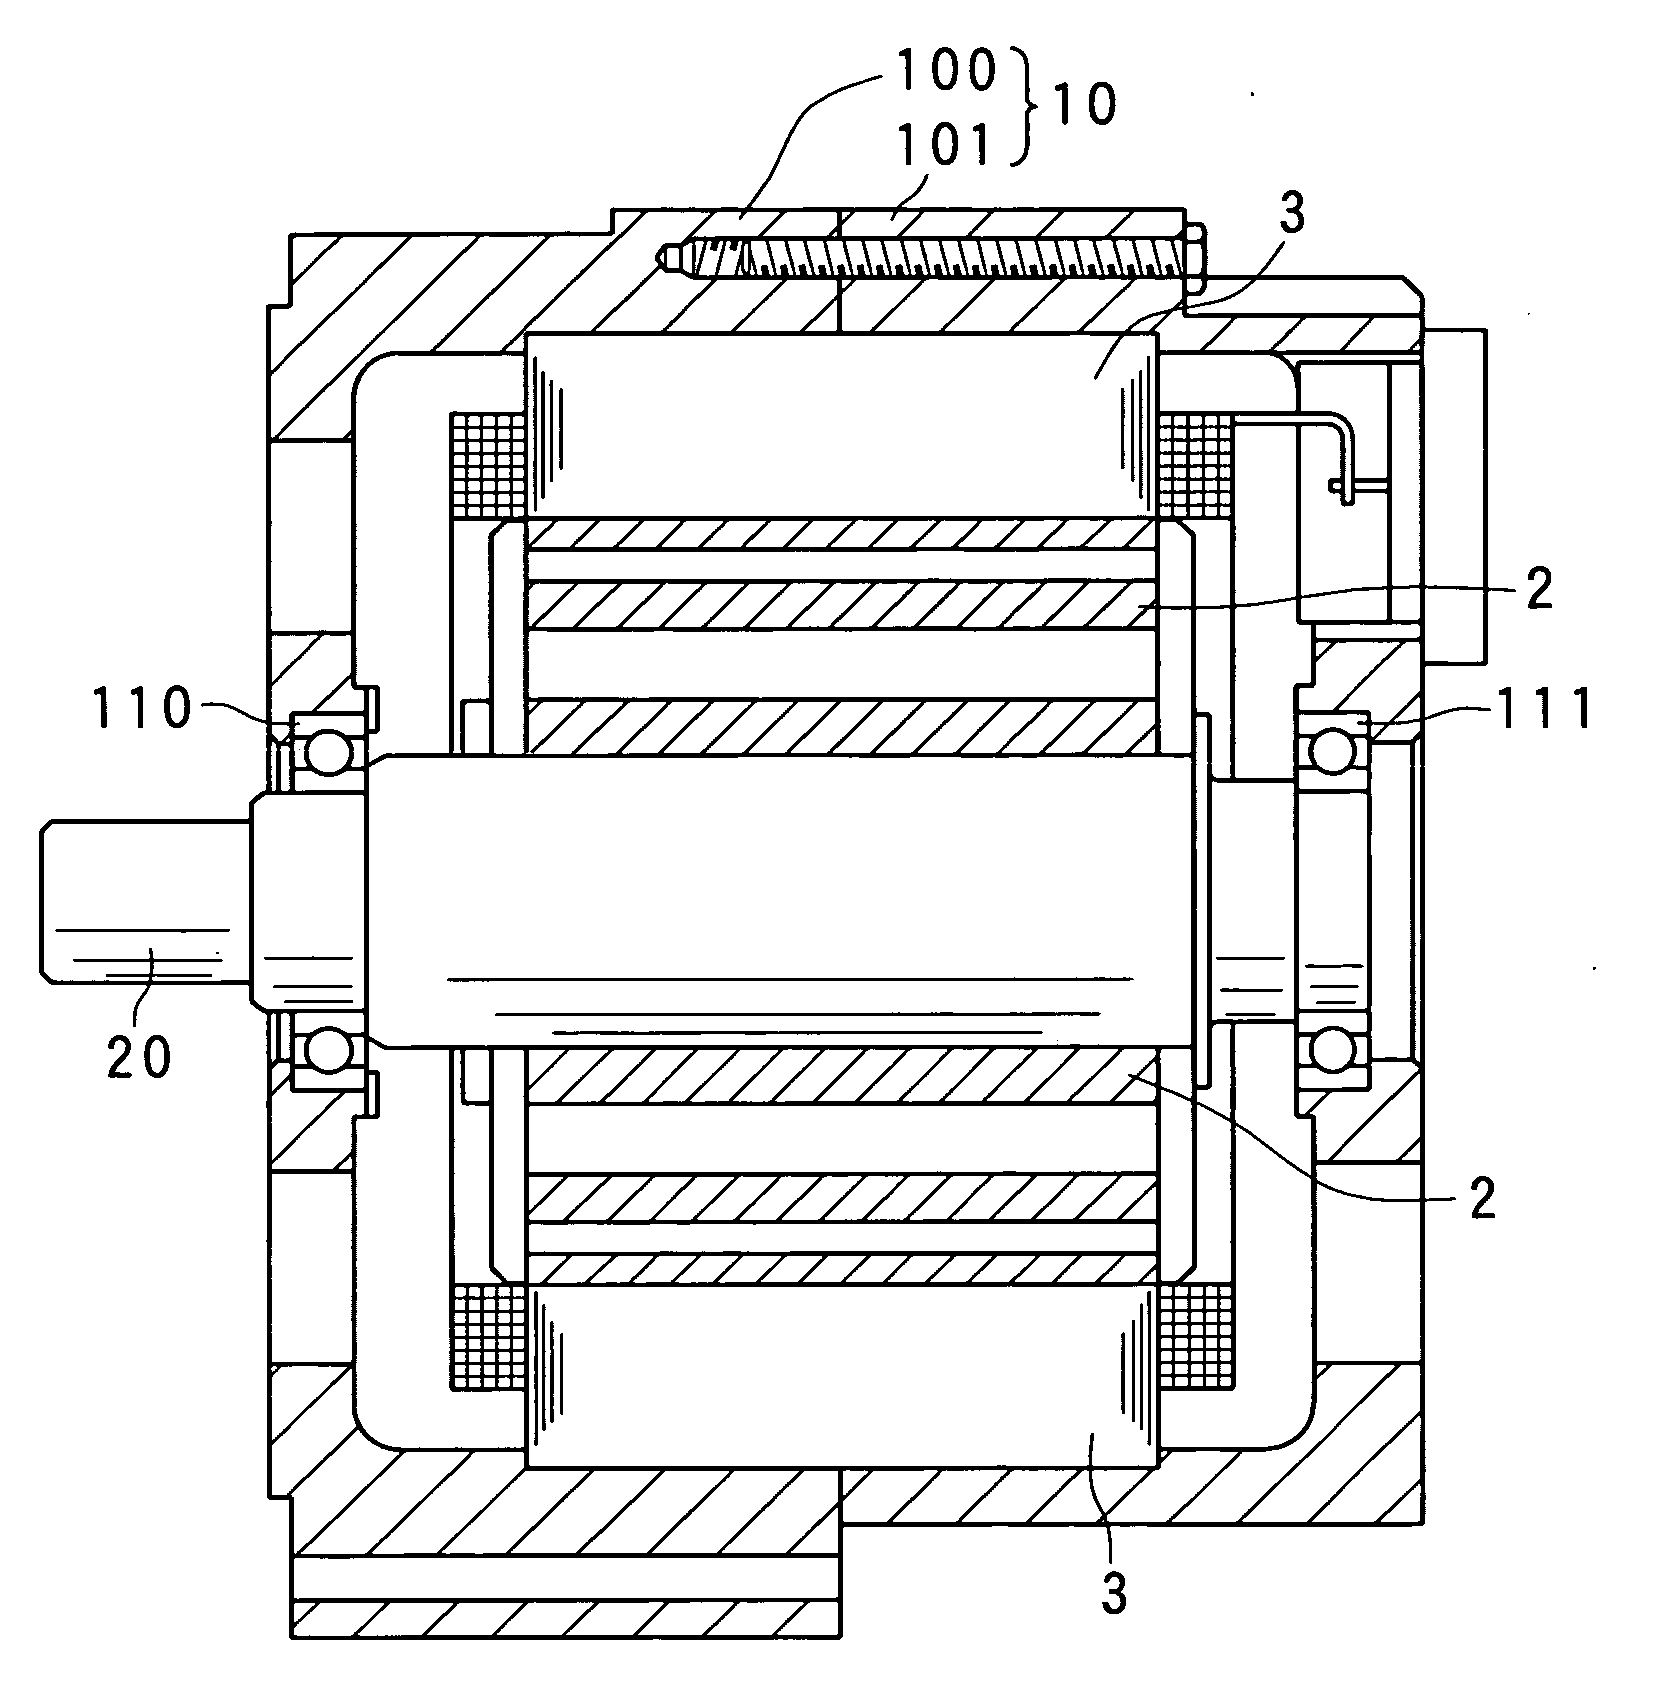 Stator manufacturing apparatus and method for rotary electric machines